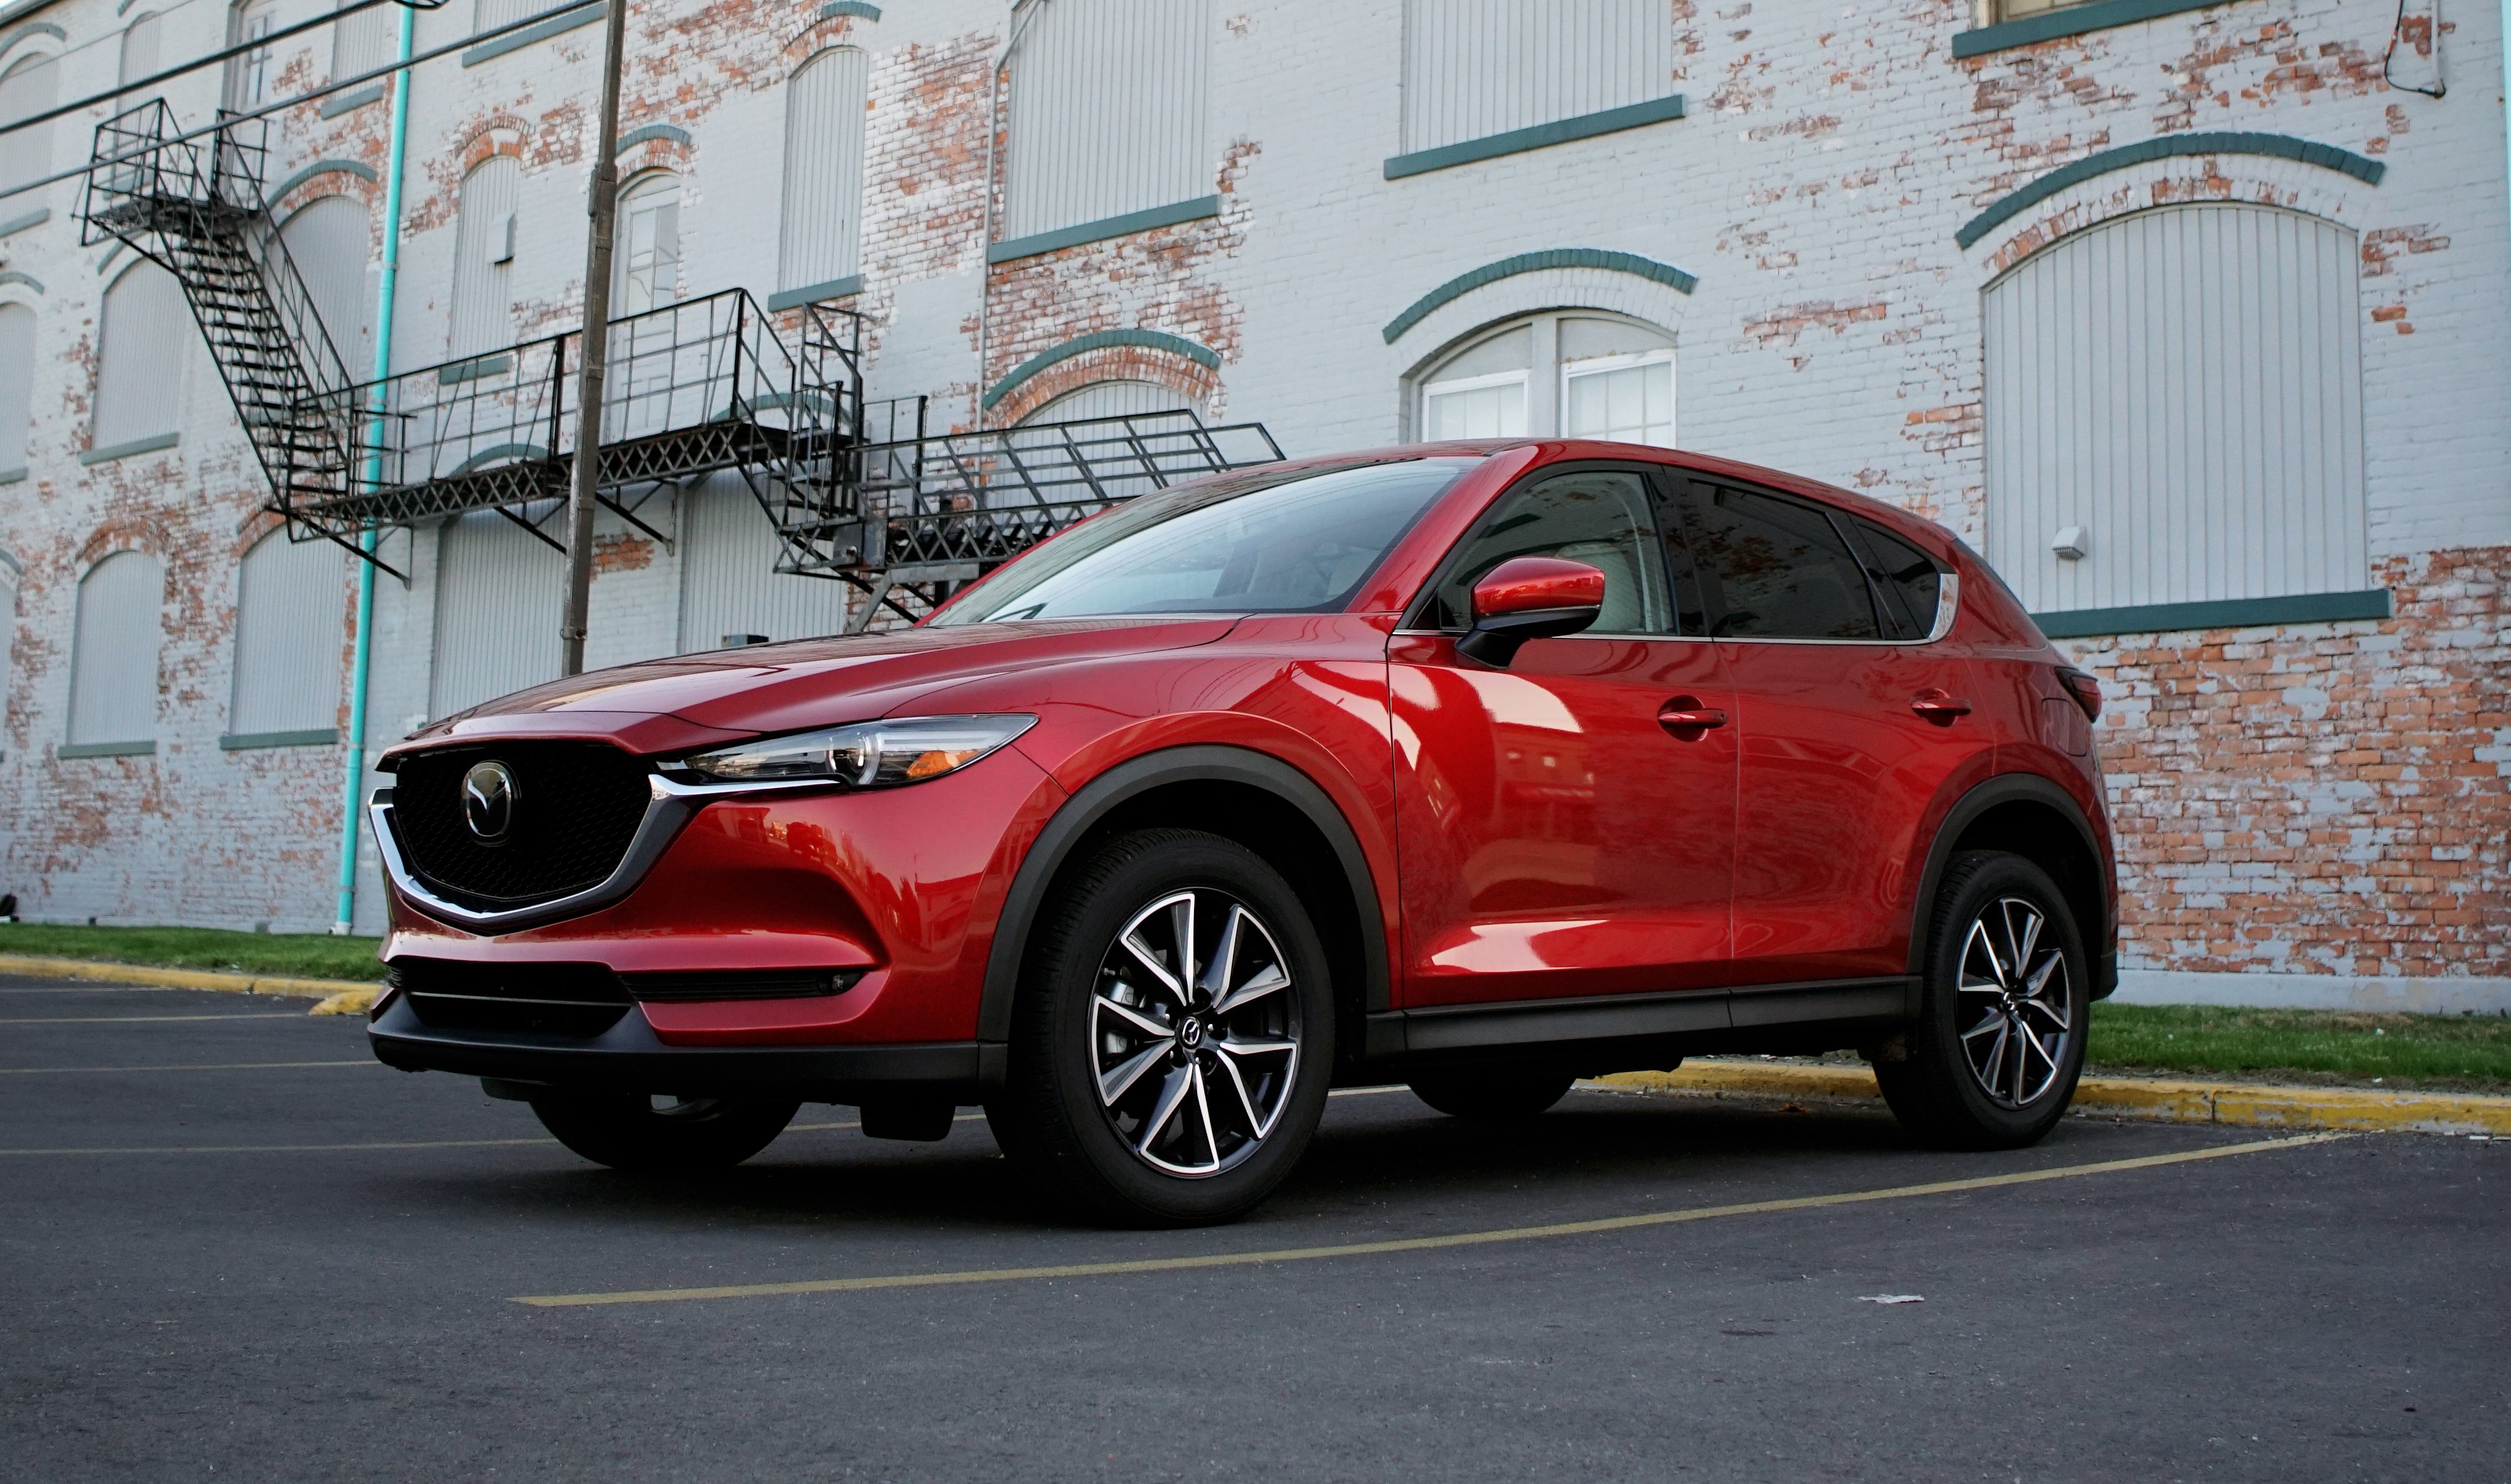 The 2018 CX-5 looks great on the outside as well.